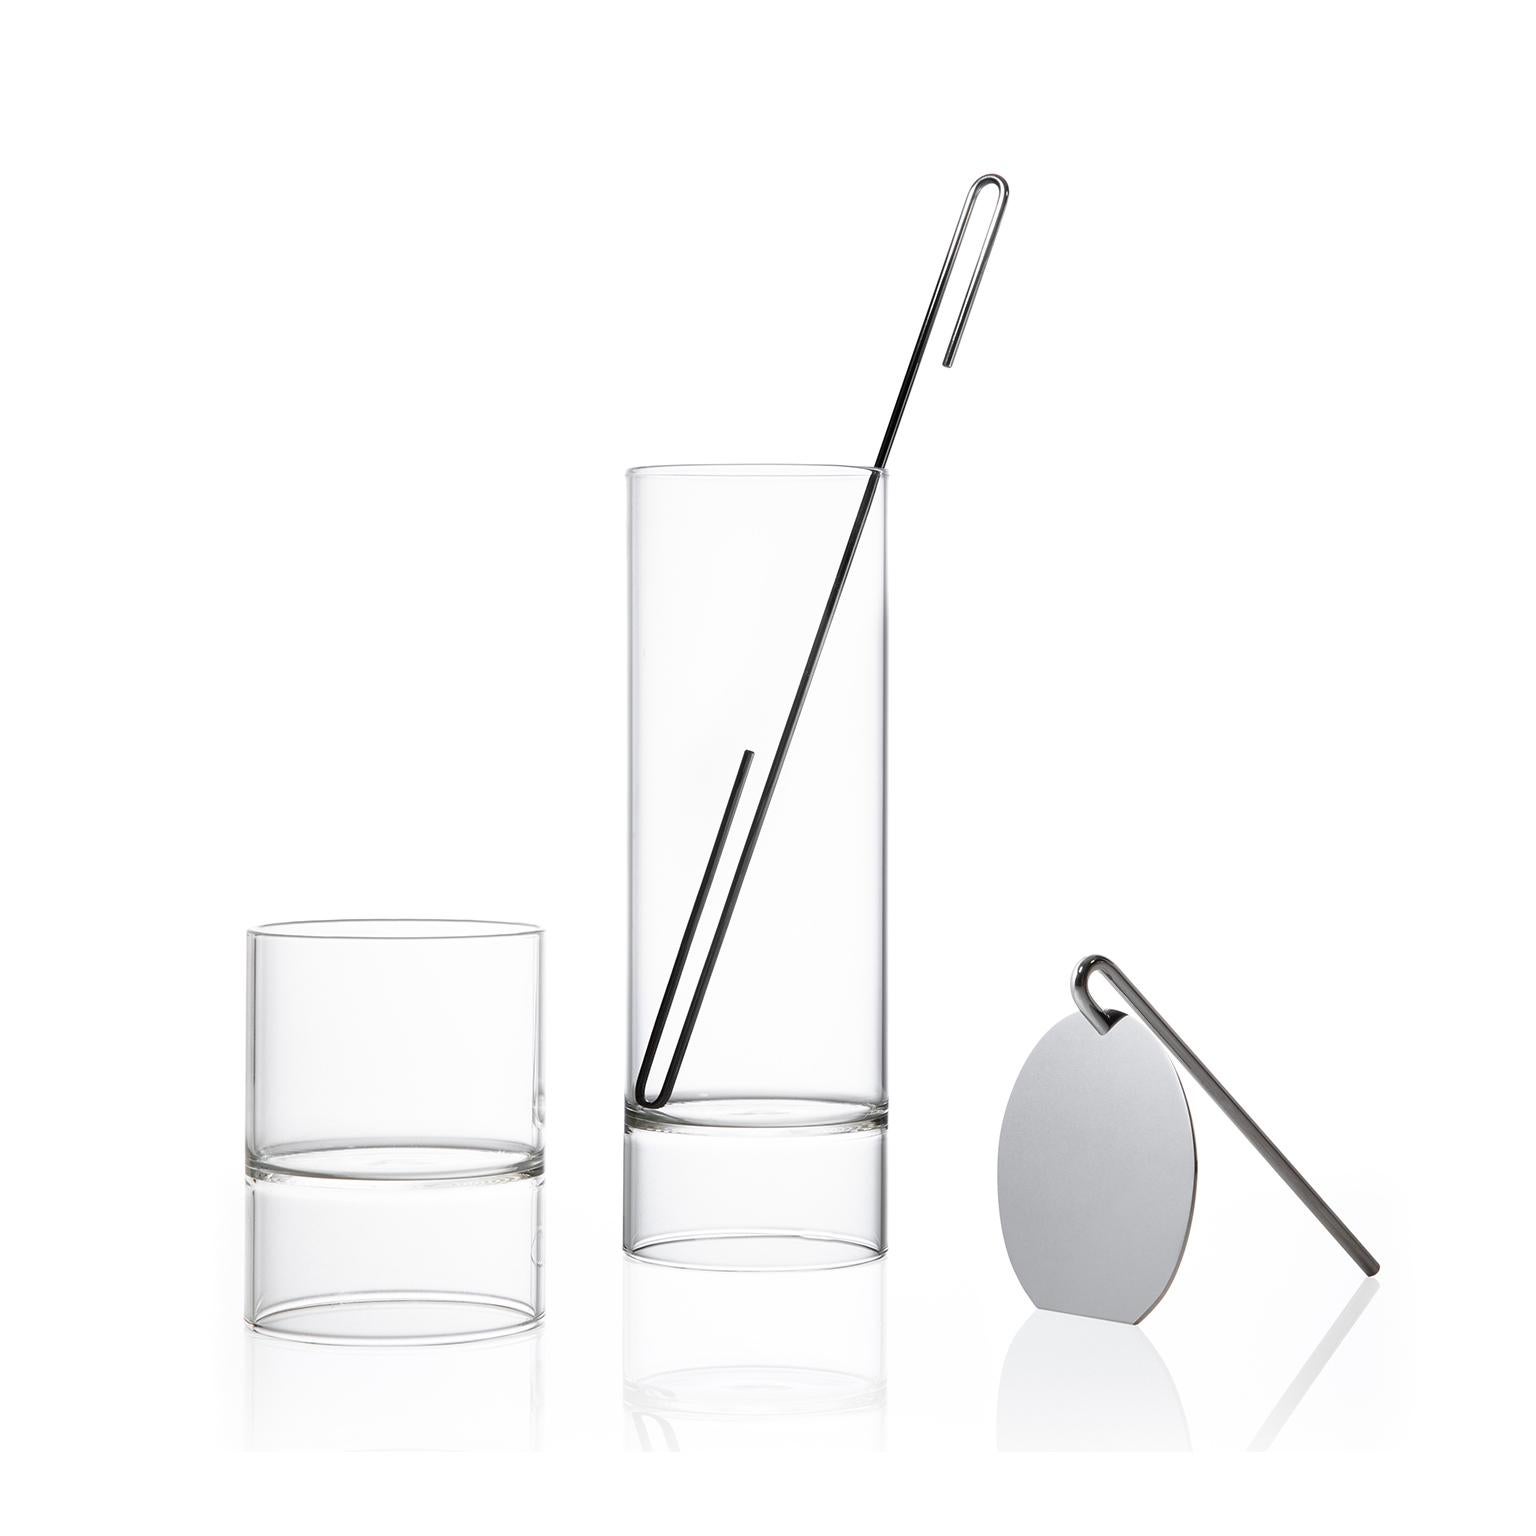 Revolution cocktail mixer set

This item is also available in the US.

Strikingly simple in form, the contemporary handcrafted Revolution collection cocktail mixer pitcher set is handcrafted in the Czech Republic by master glassblowers, and